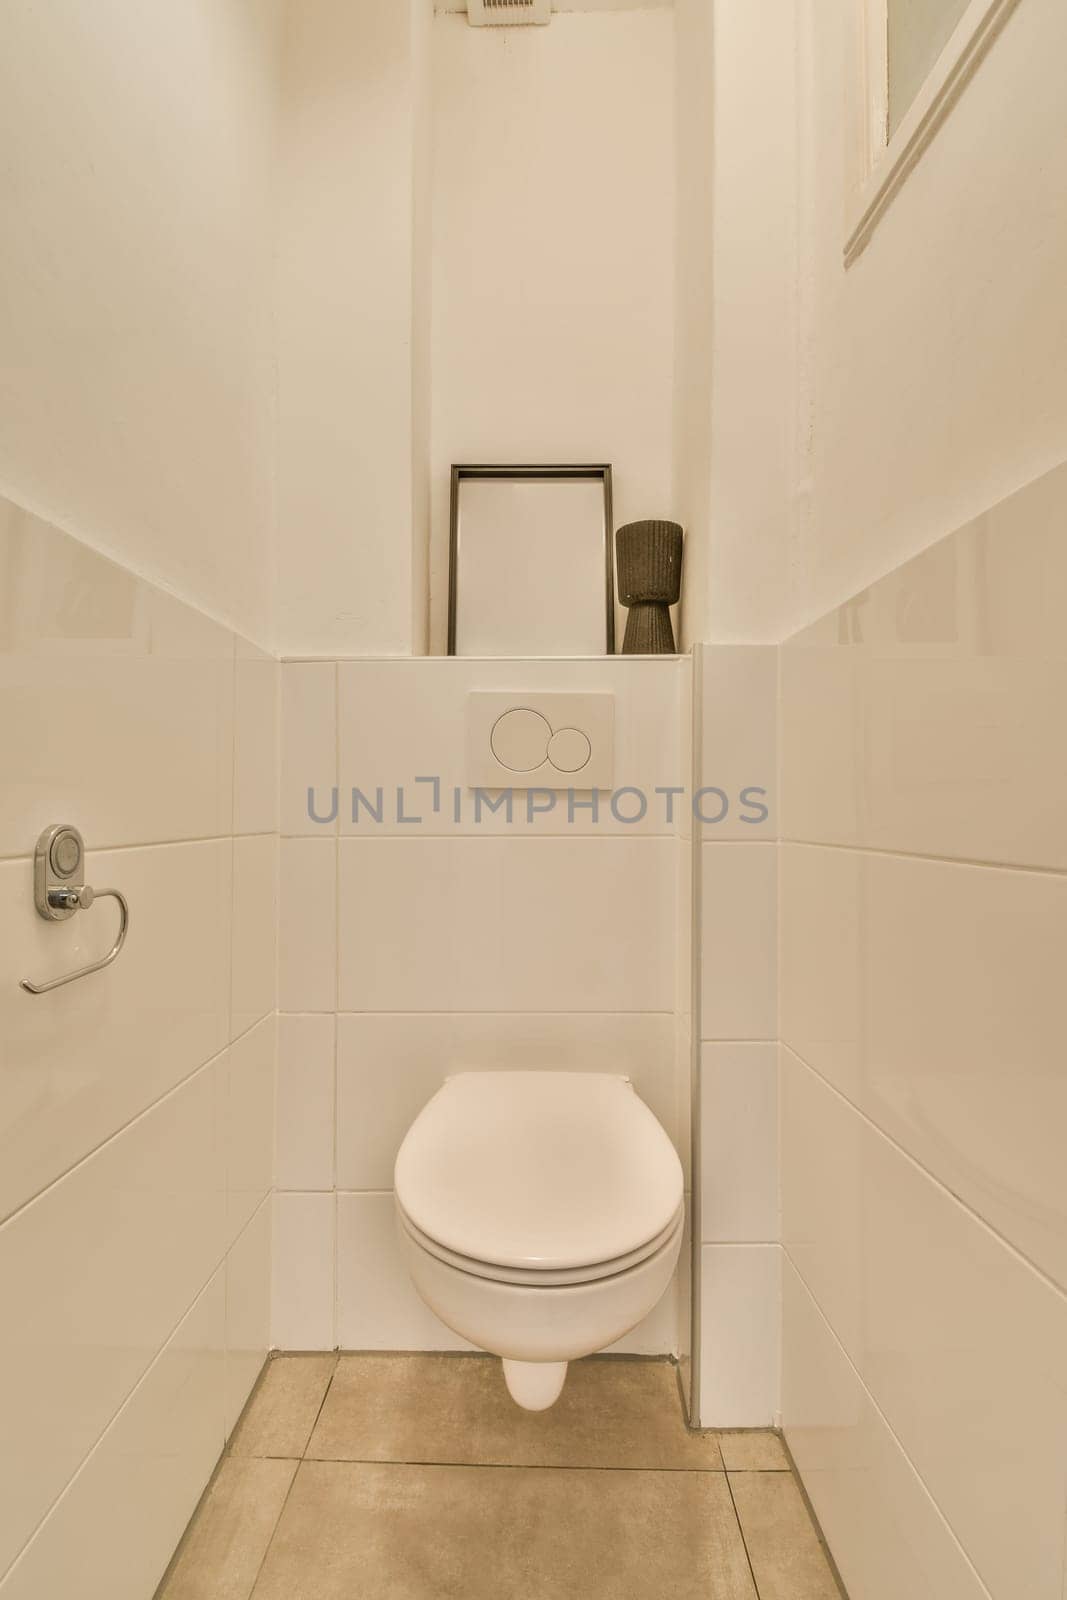 a white toilet in a bathroom with tile flooring and wall mounted mirror above the toilet bowl on the right side